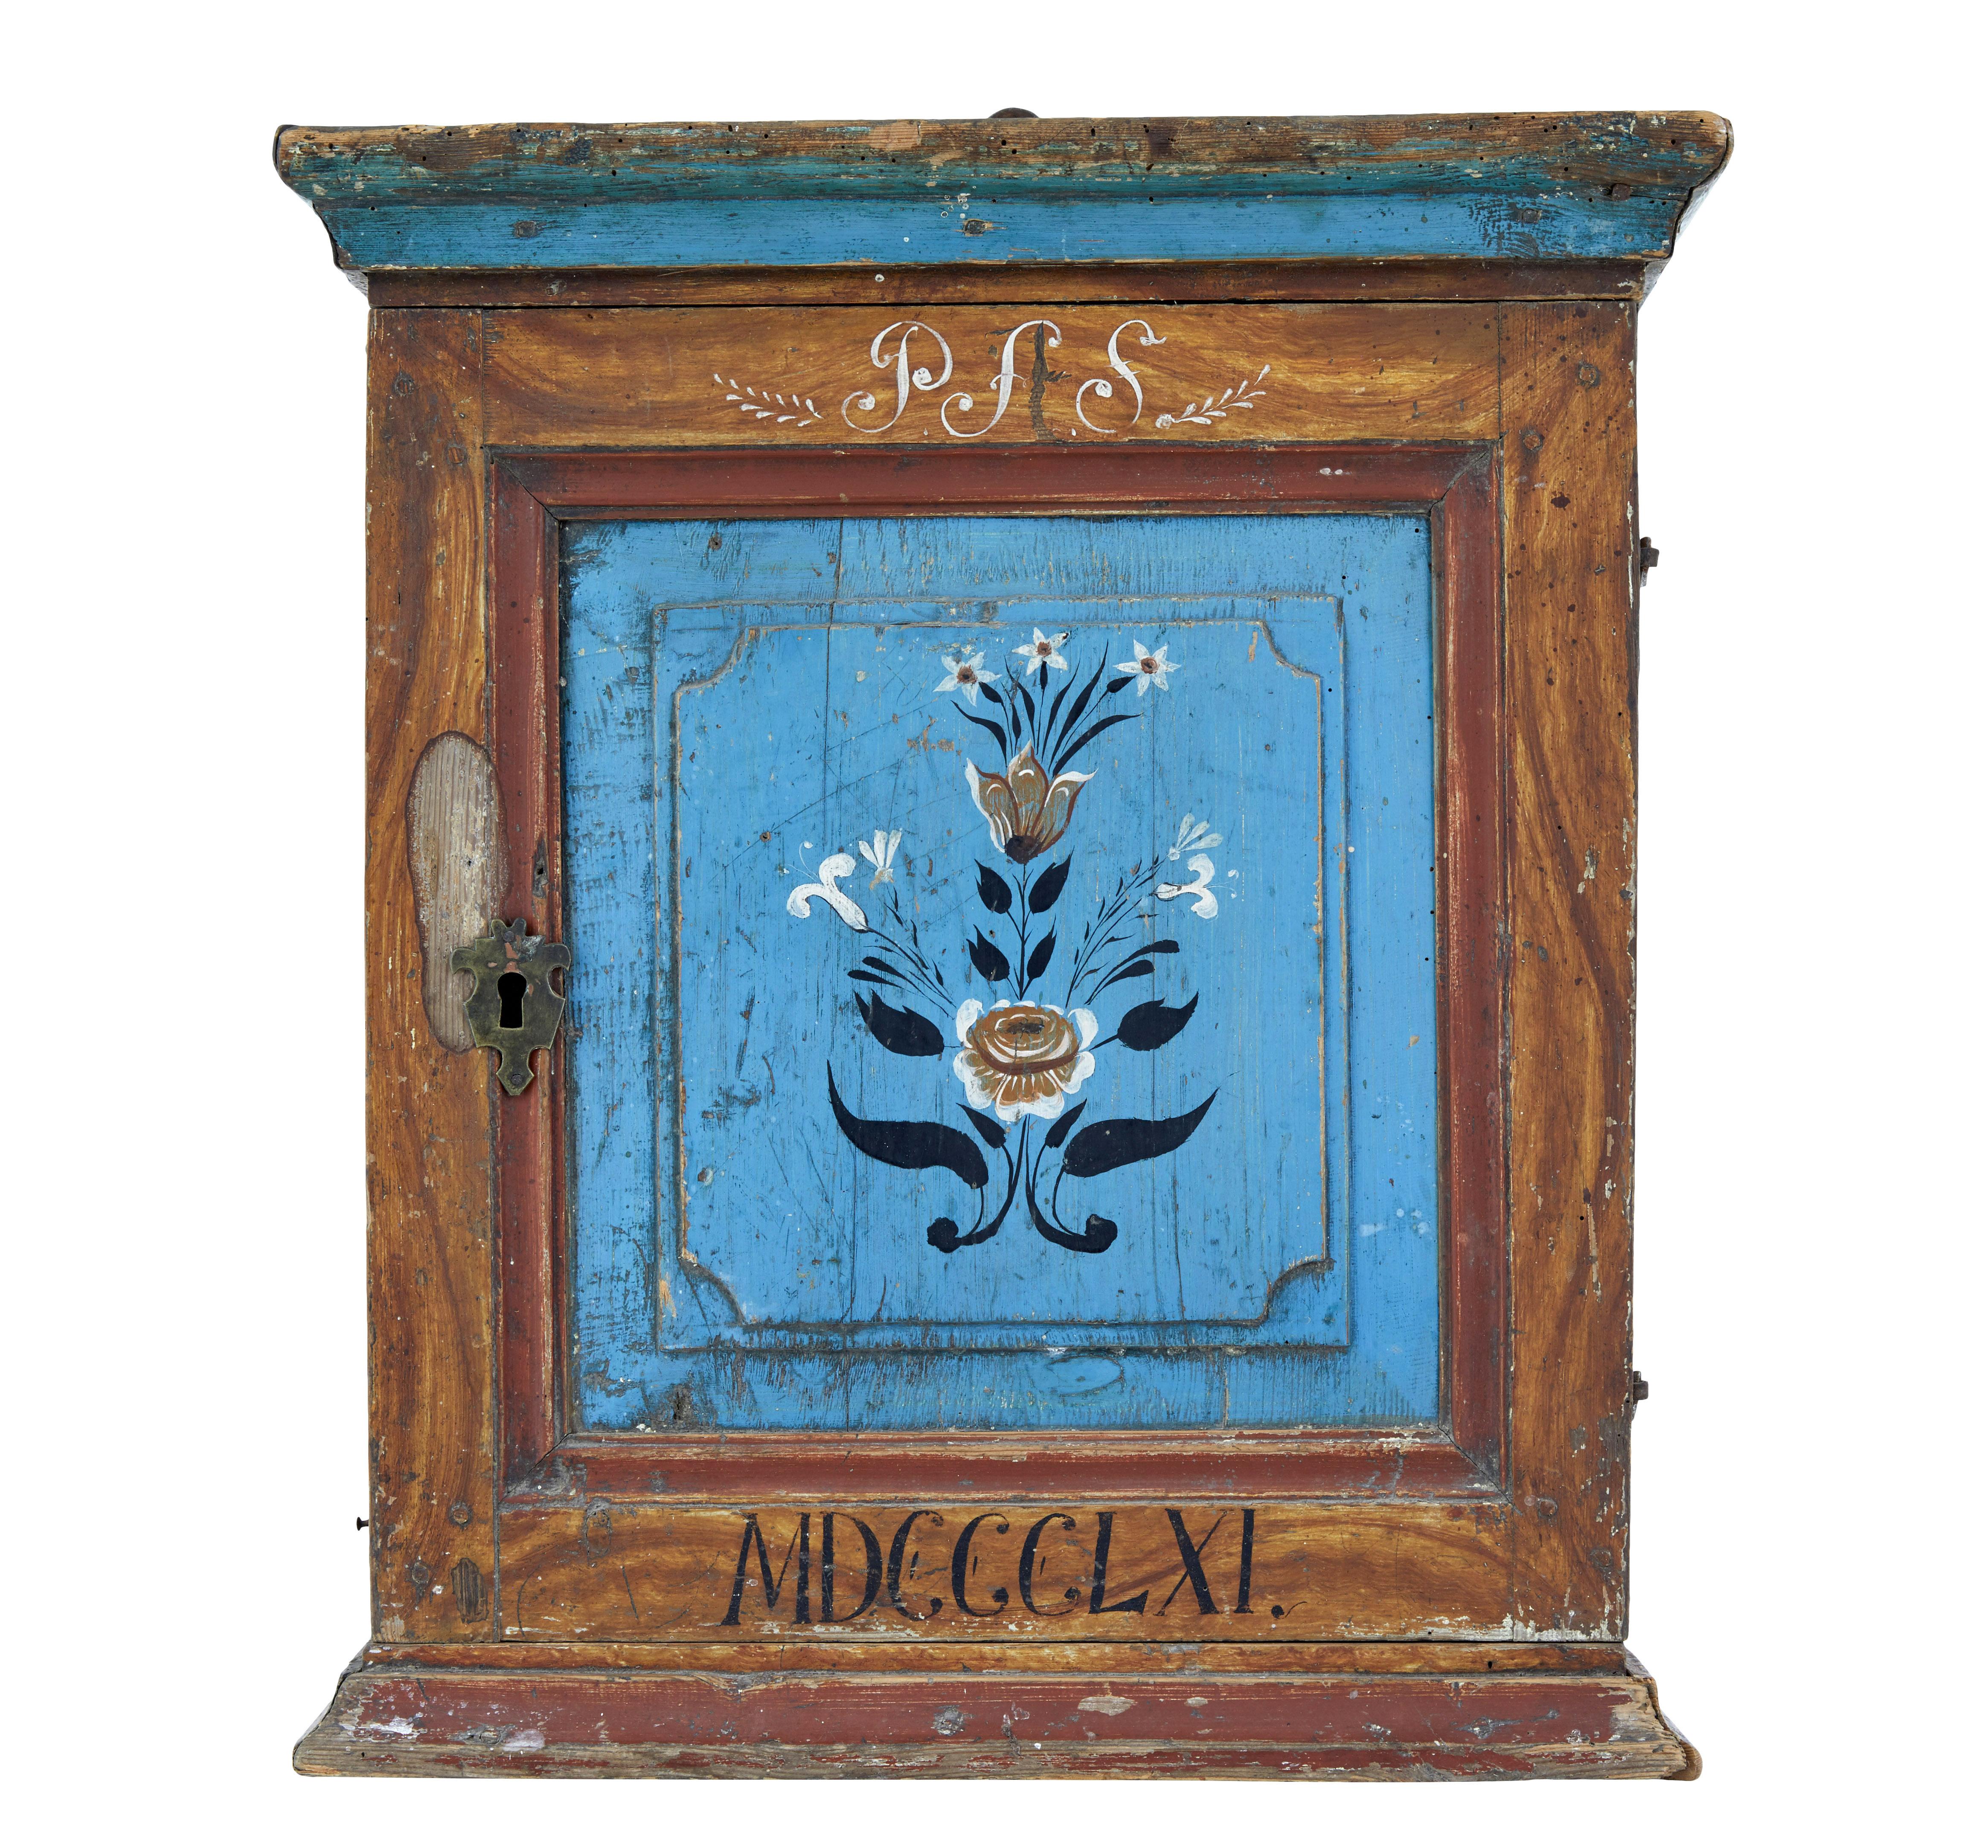 Hand painted mid 19th century swedish pine wall cupboard circa 1861.

Good quality traditional hand painted swedish wall cupboard.  Made from pine and painted in a blue/orange and russet red scheme.  Cornice edged to top and bottom.  Hand painted